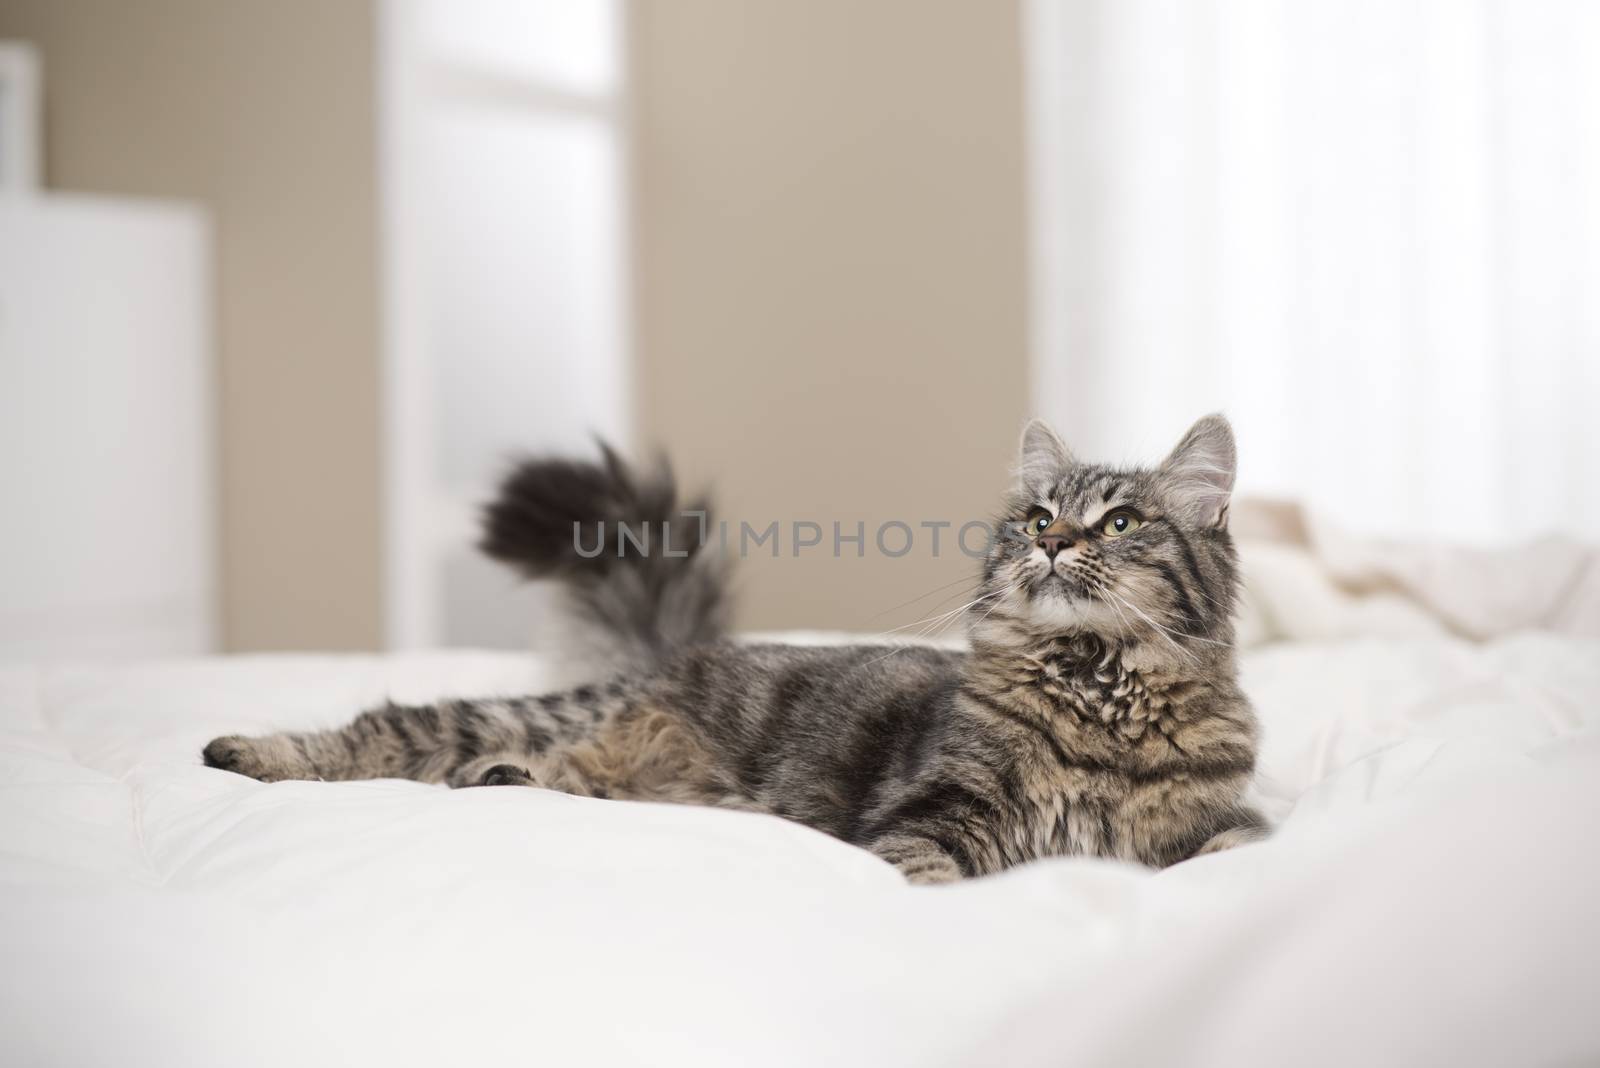 Portrait of a beautiful cat resting on a bed